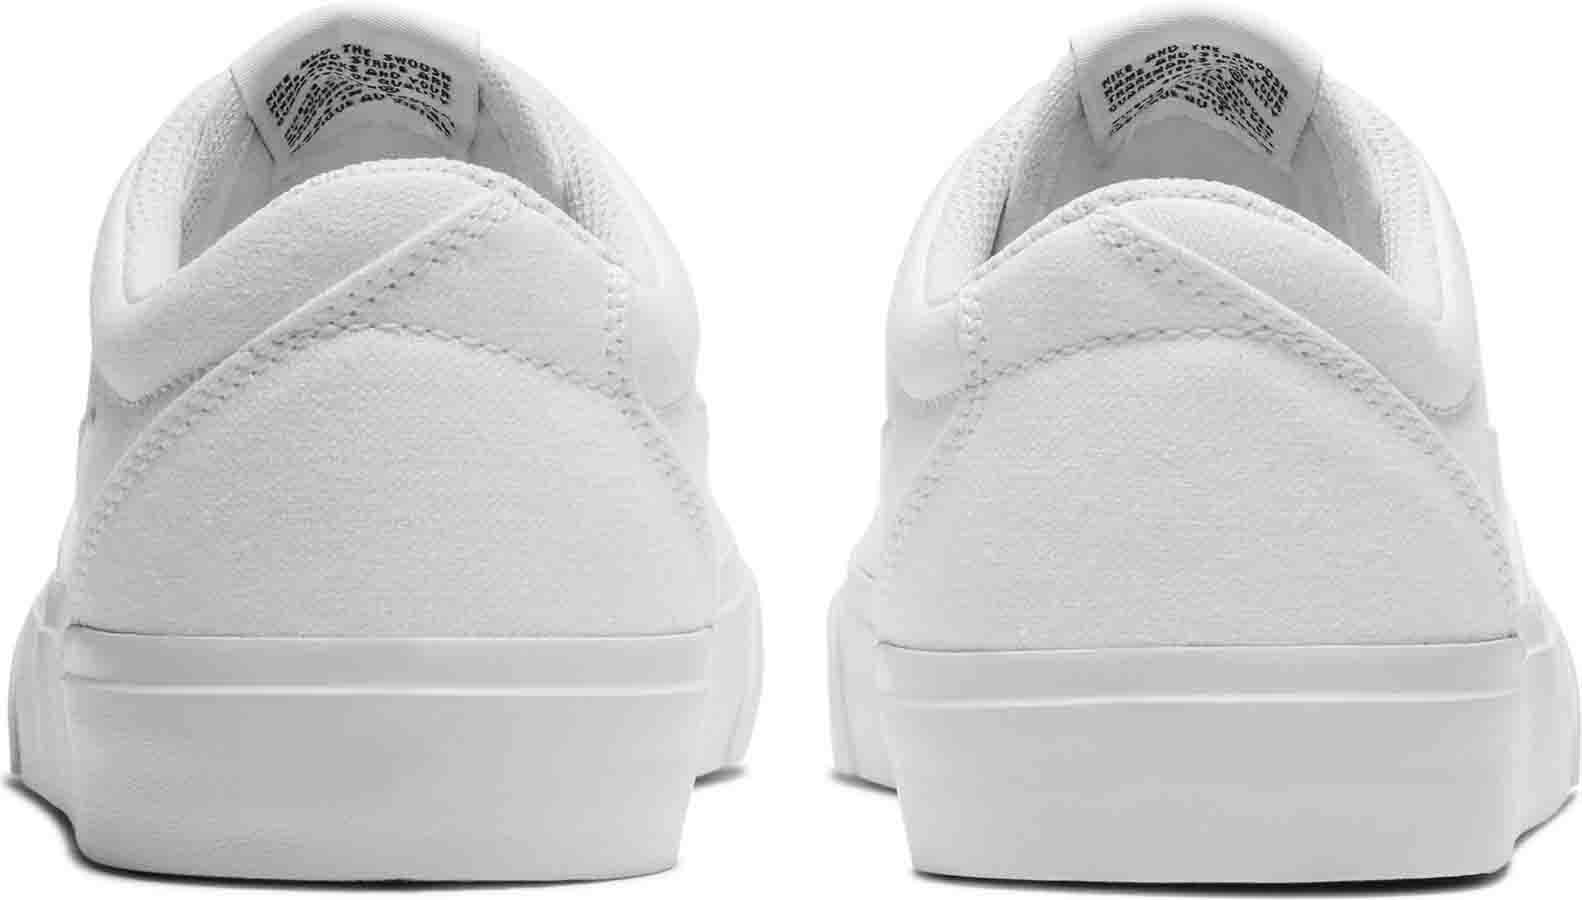 Nike SB Charge Canvas Women's Skate Shoes